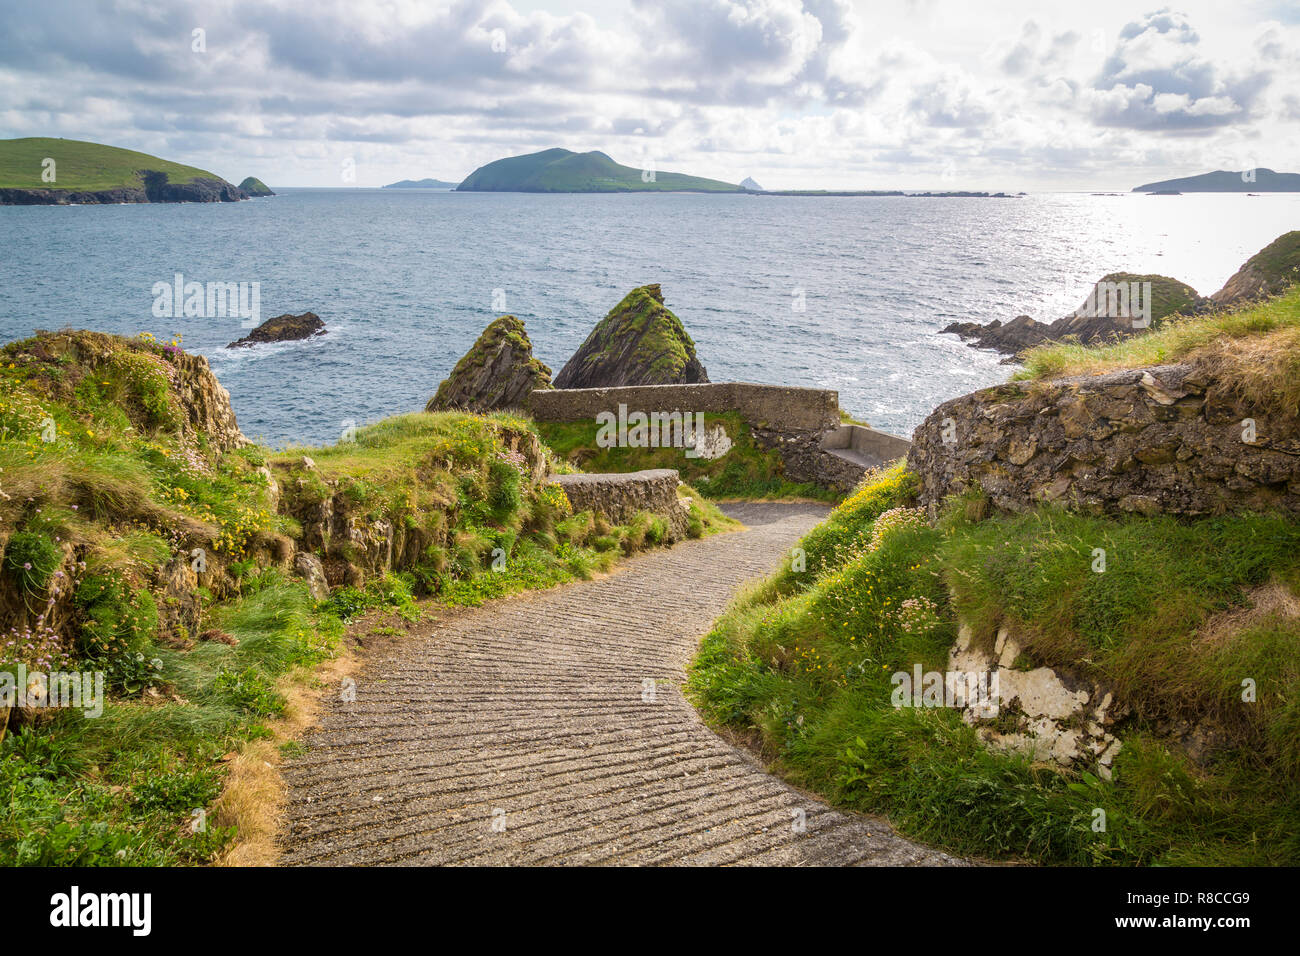 old Dunquin Pier for boattrip to the Blasket Islands Stock Photo